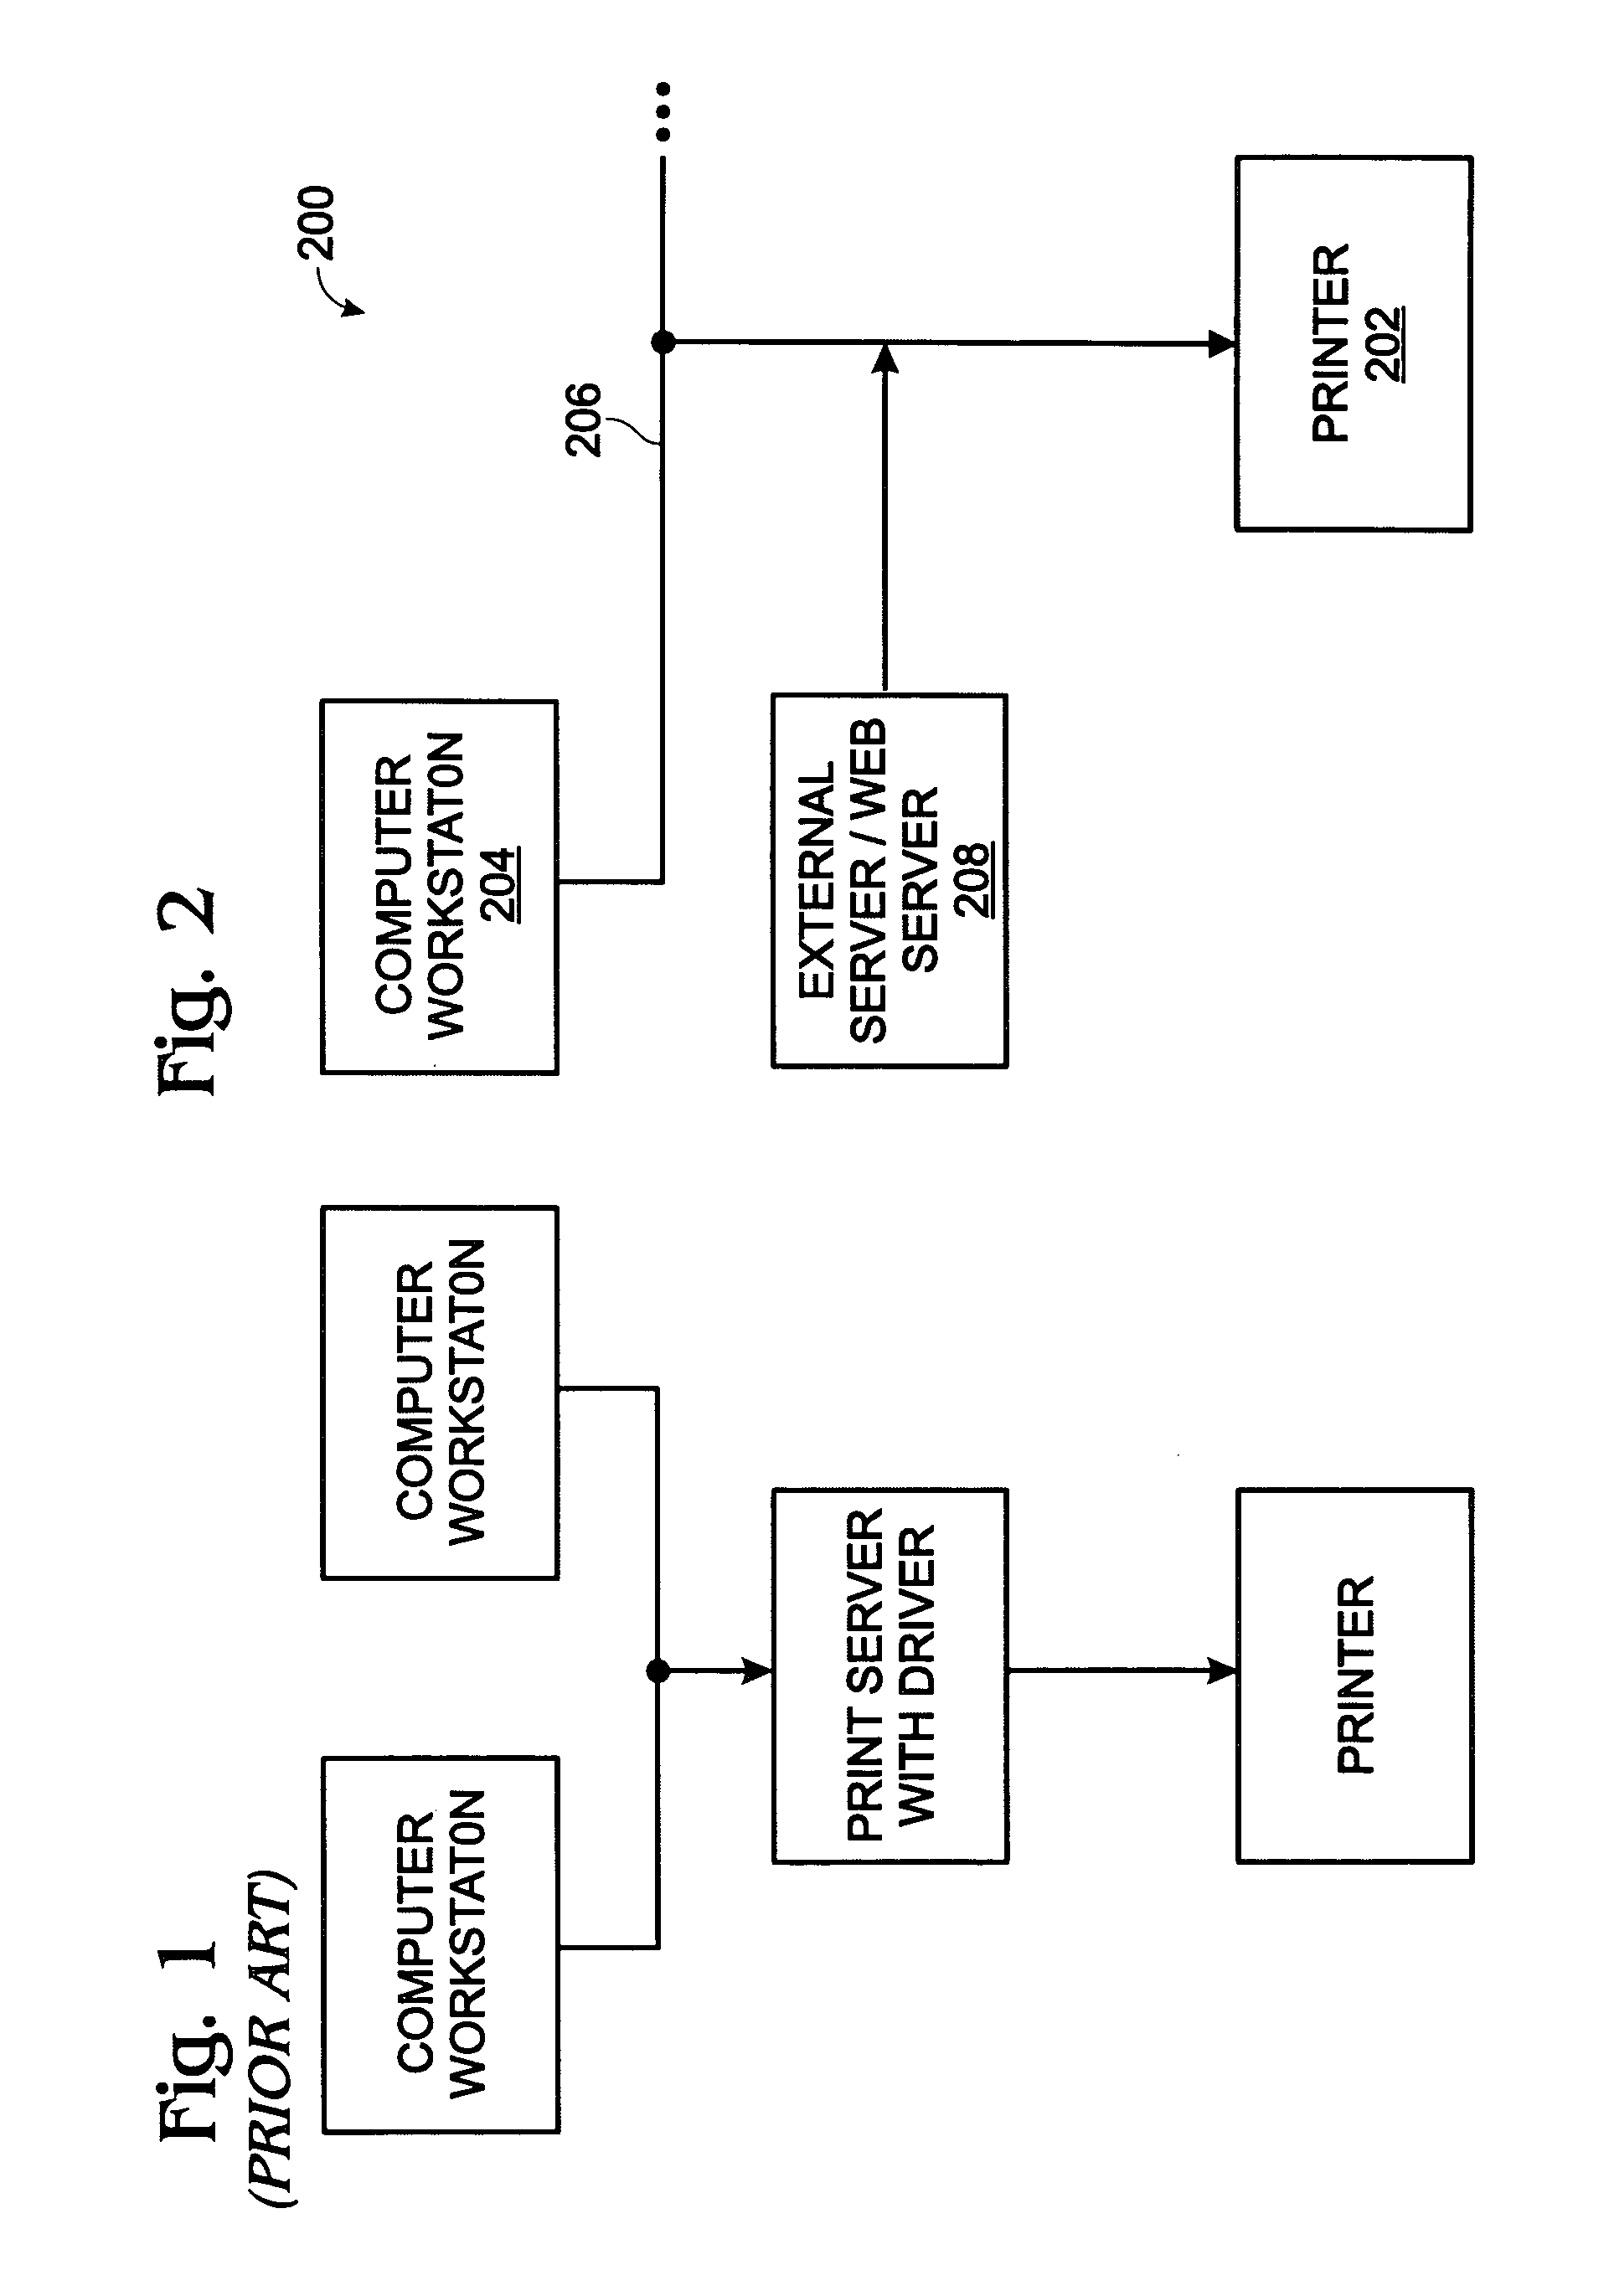 System and method for installing printer driver software